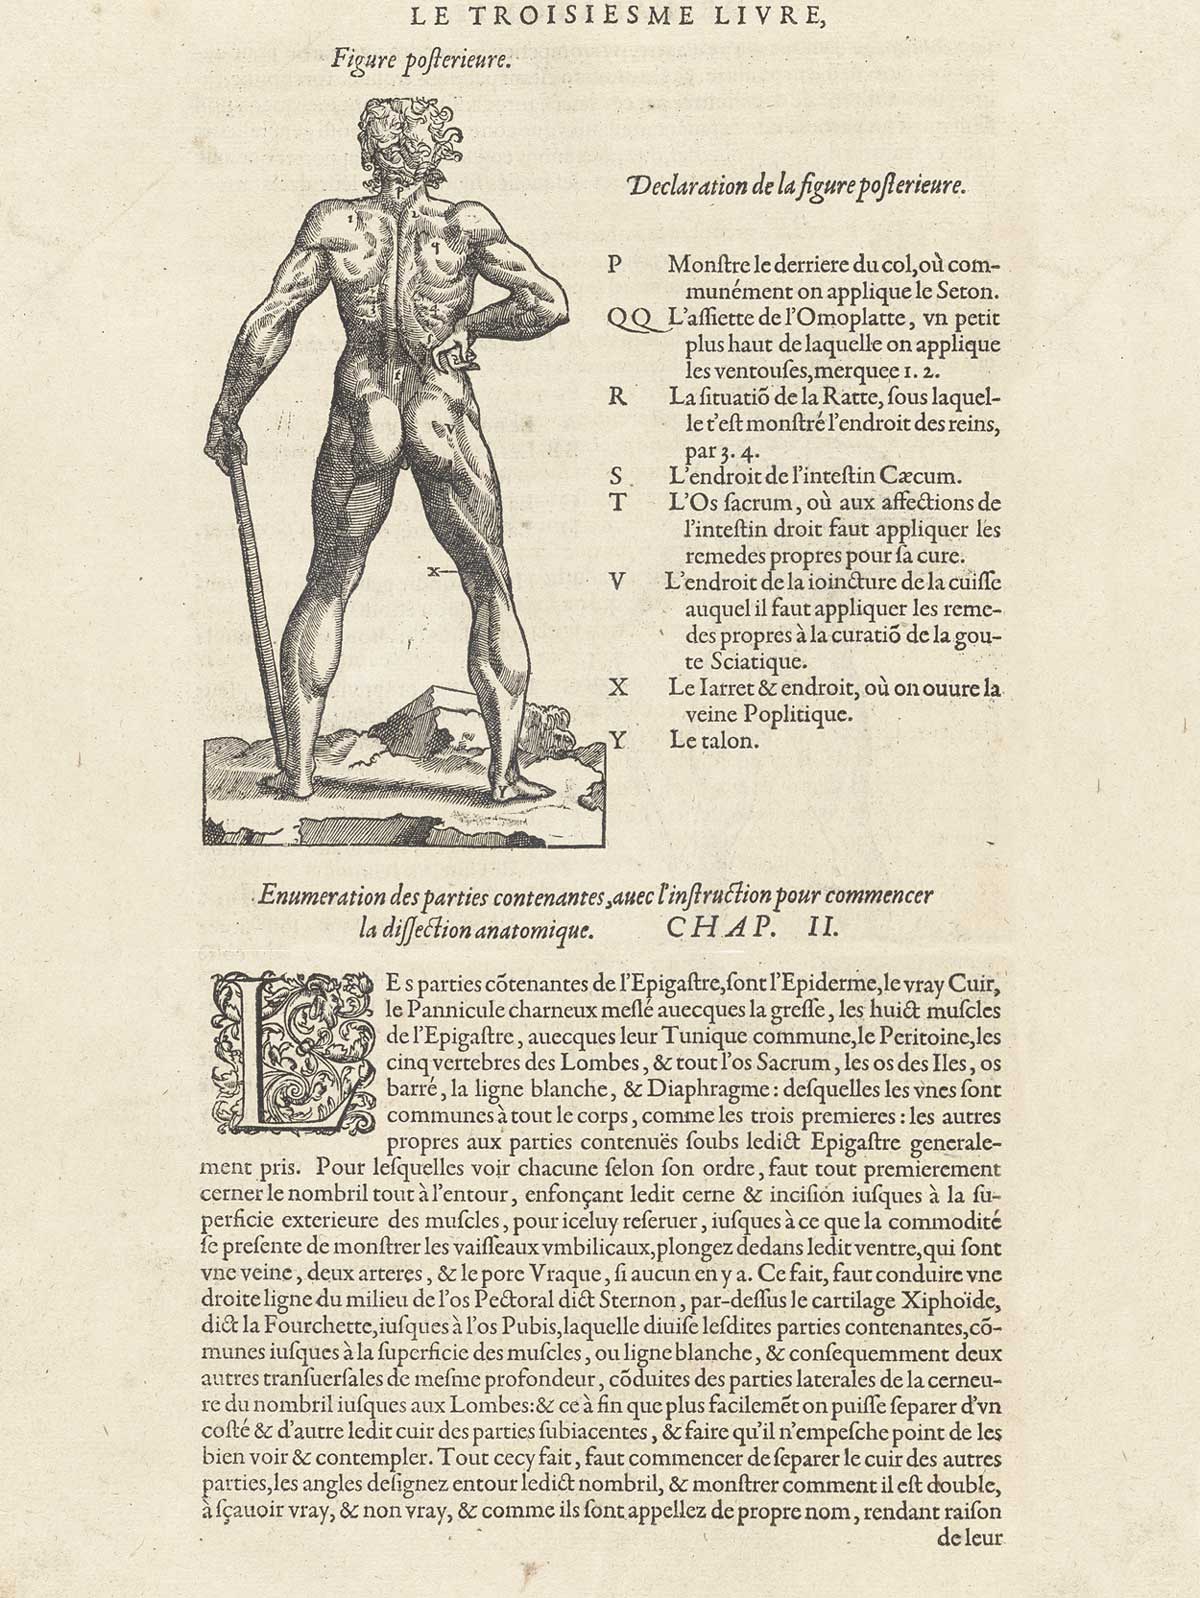 Typeset page of text in French with a large woodcut in the top half of the page showing a nude male figure standing with back to the viewer, holding a stick in his left hand, from Ambroise Paré’s Oeuvres, NLM Call no.: WZ 240 P227 1585.